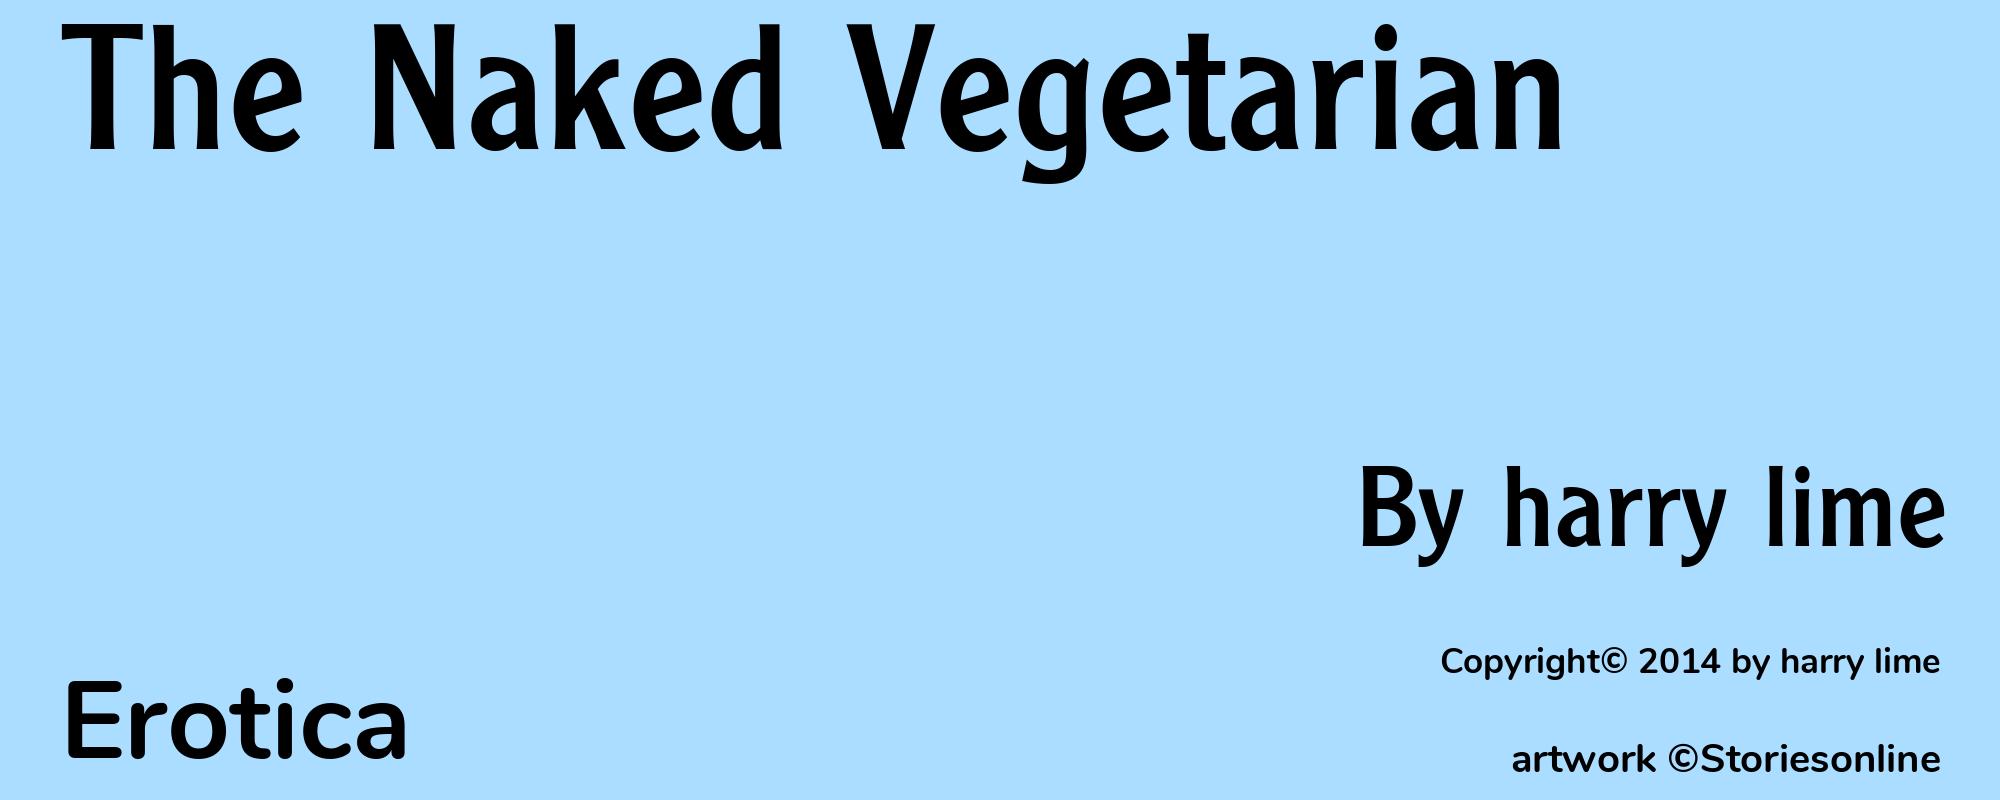 The Naked Vegetarian - Cover